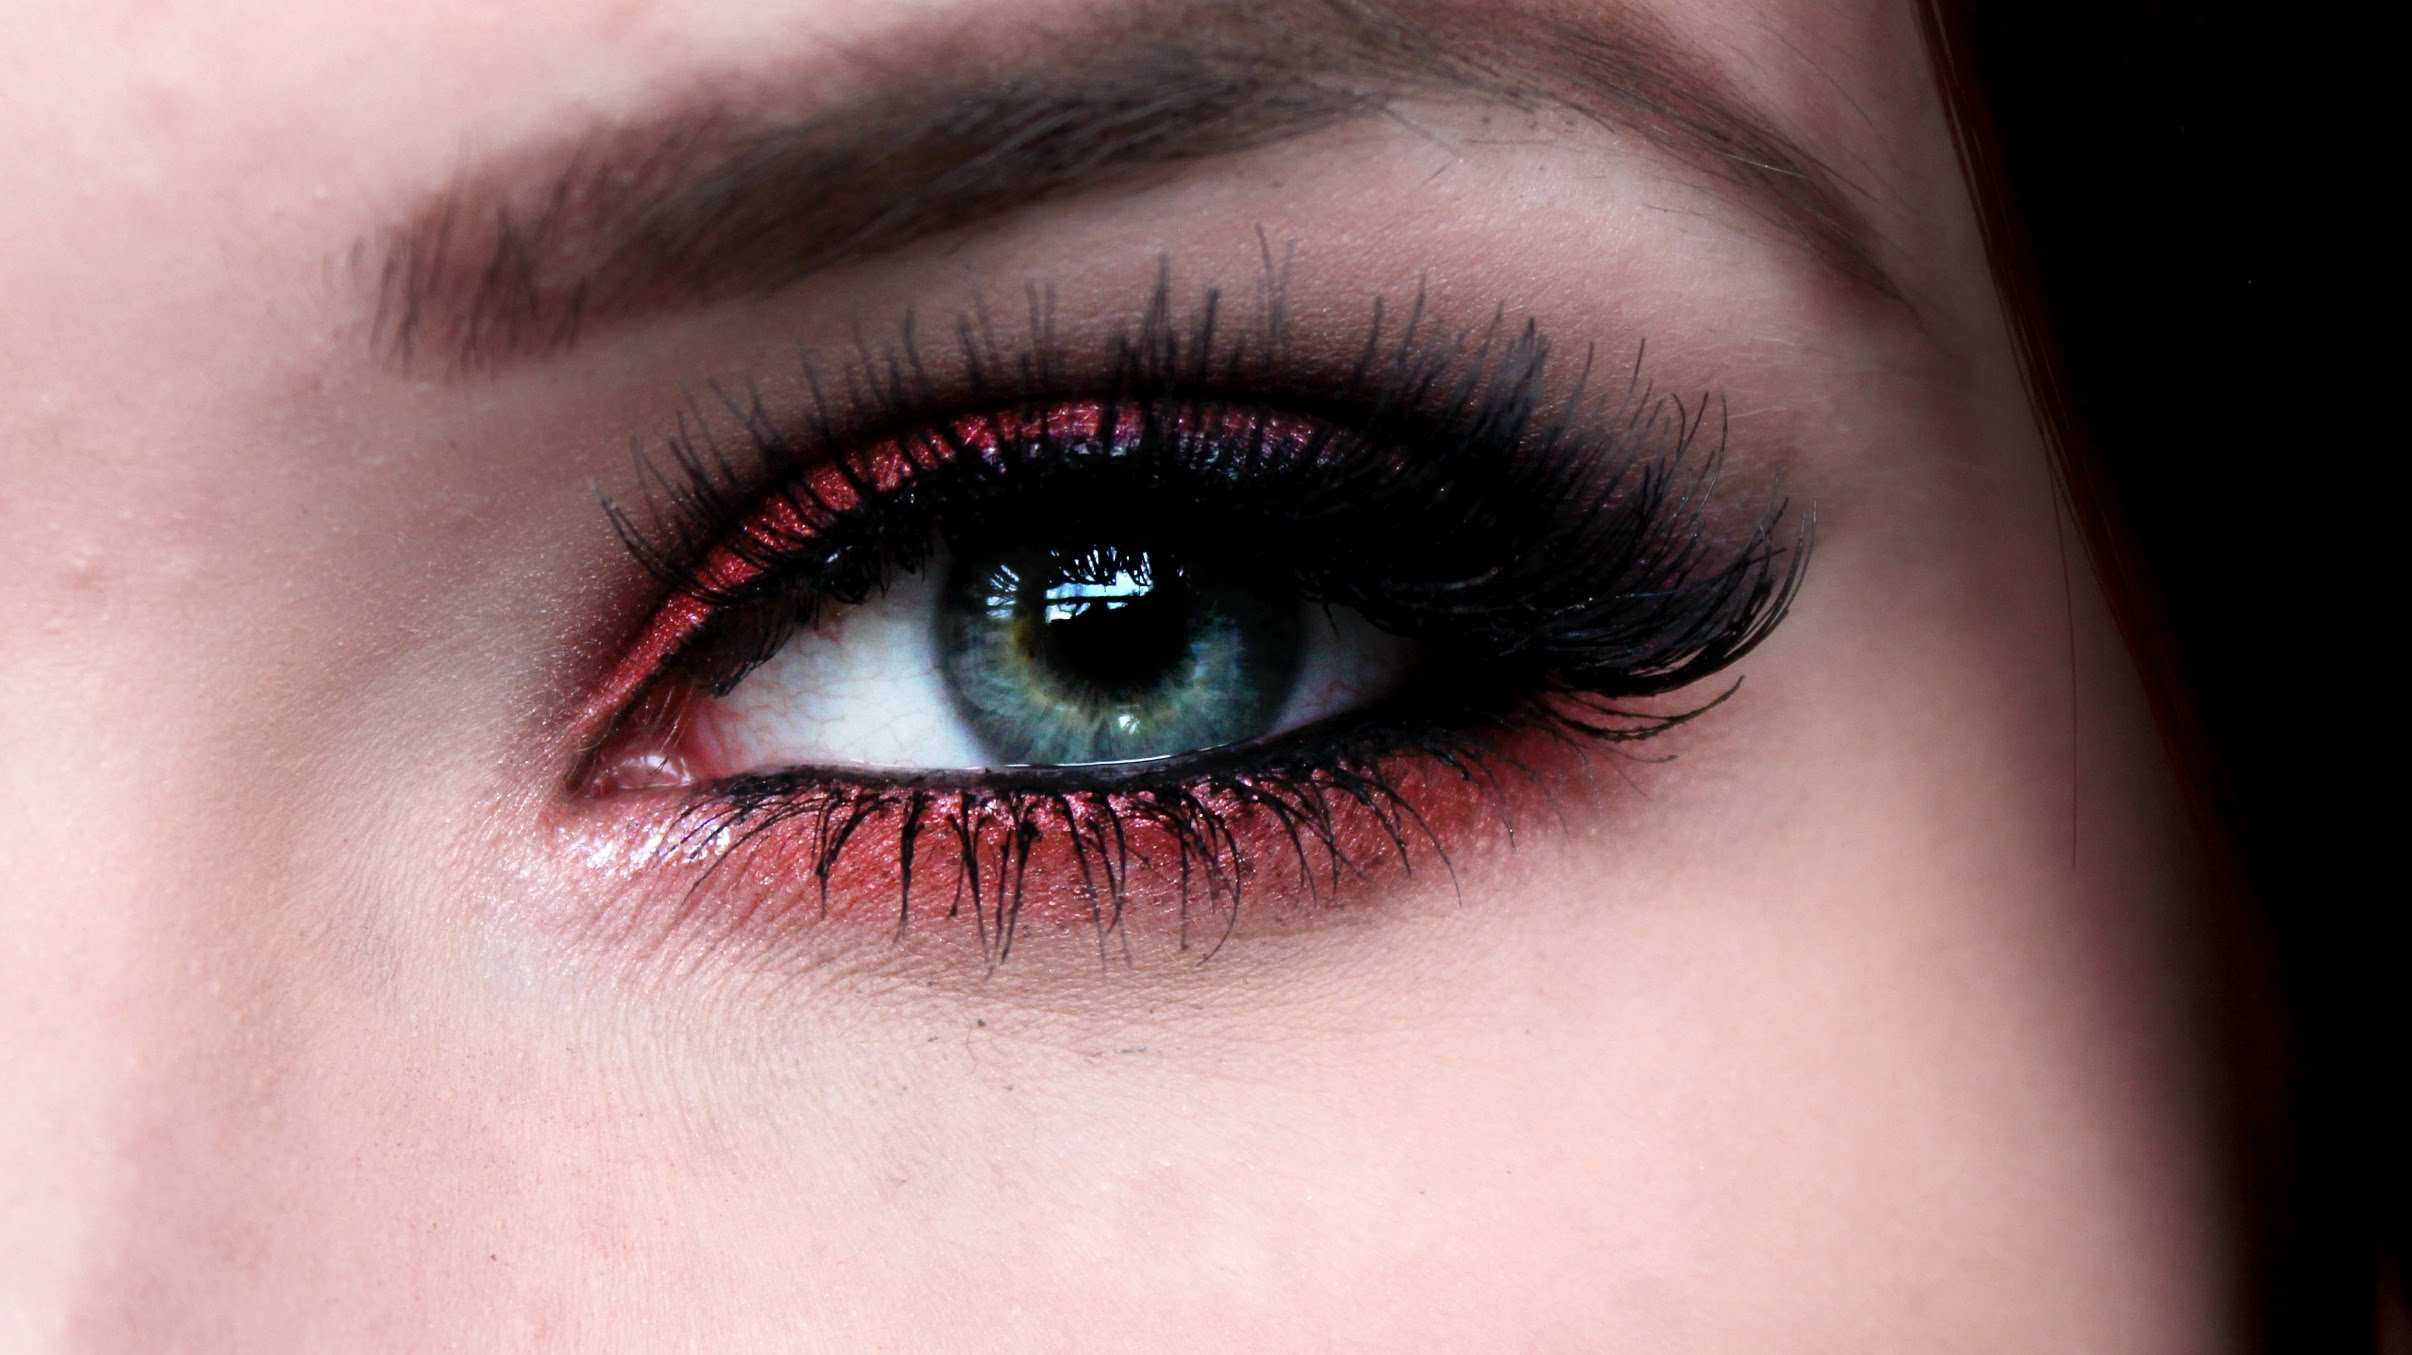 Intense Eye Makeup Clever Red Lipstick And Eye Makeup Looks For A Date Night Indian